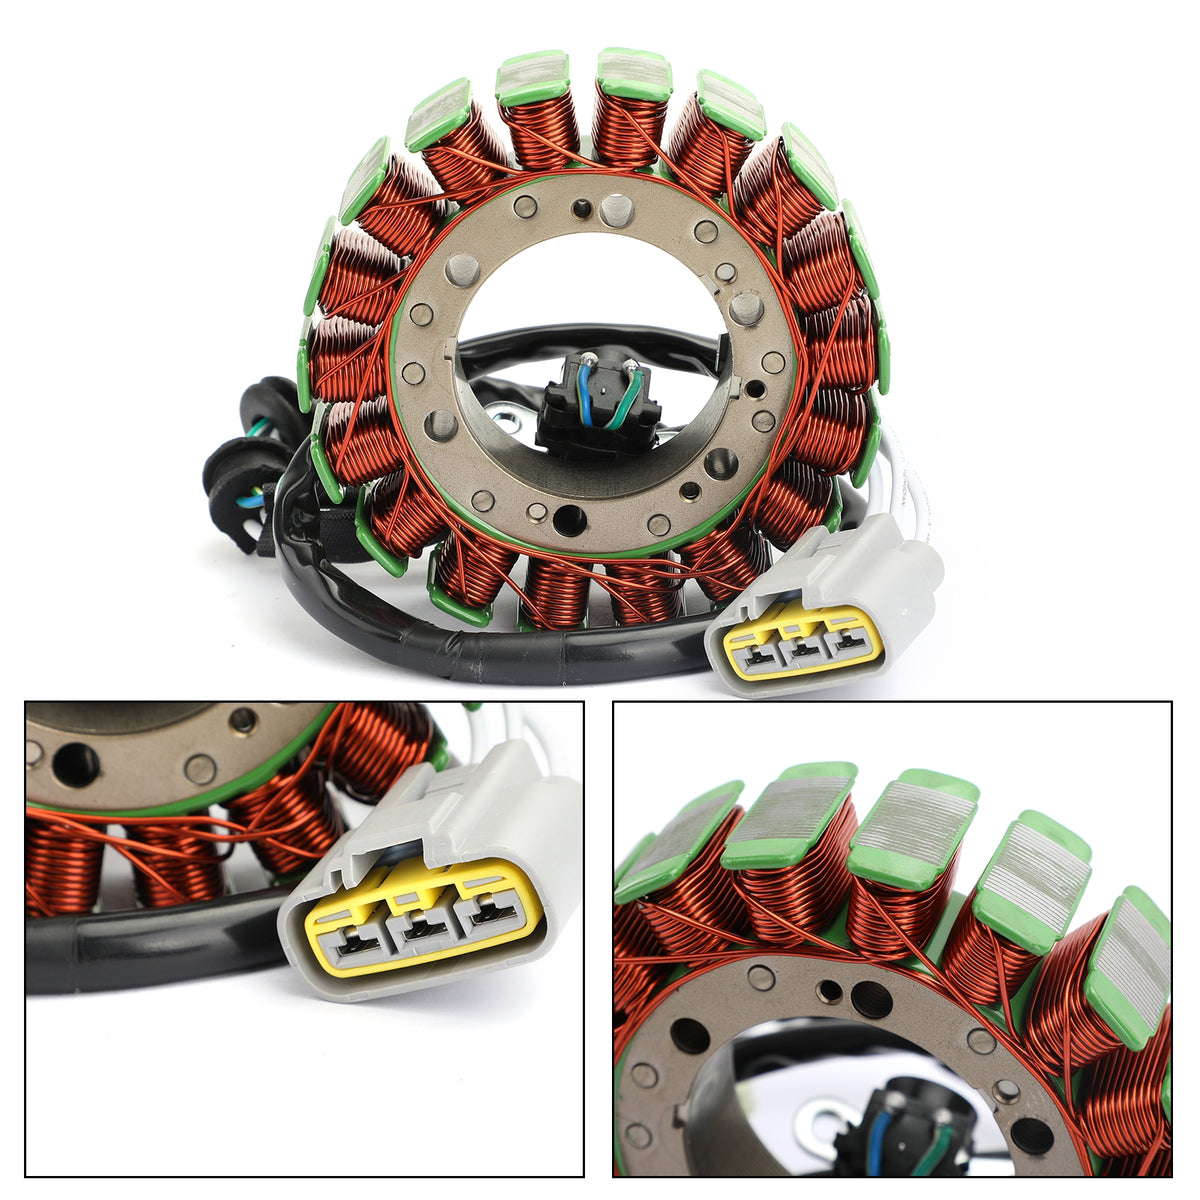 Products Magneto Generator Engine Stator Coil Fit For Yamaha TDM900 02-10 TDM900 (ABS) 2005-2010 #5PS-81410-00